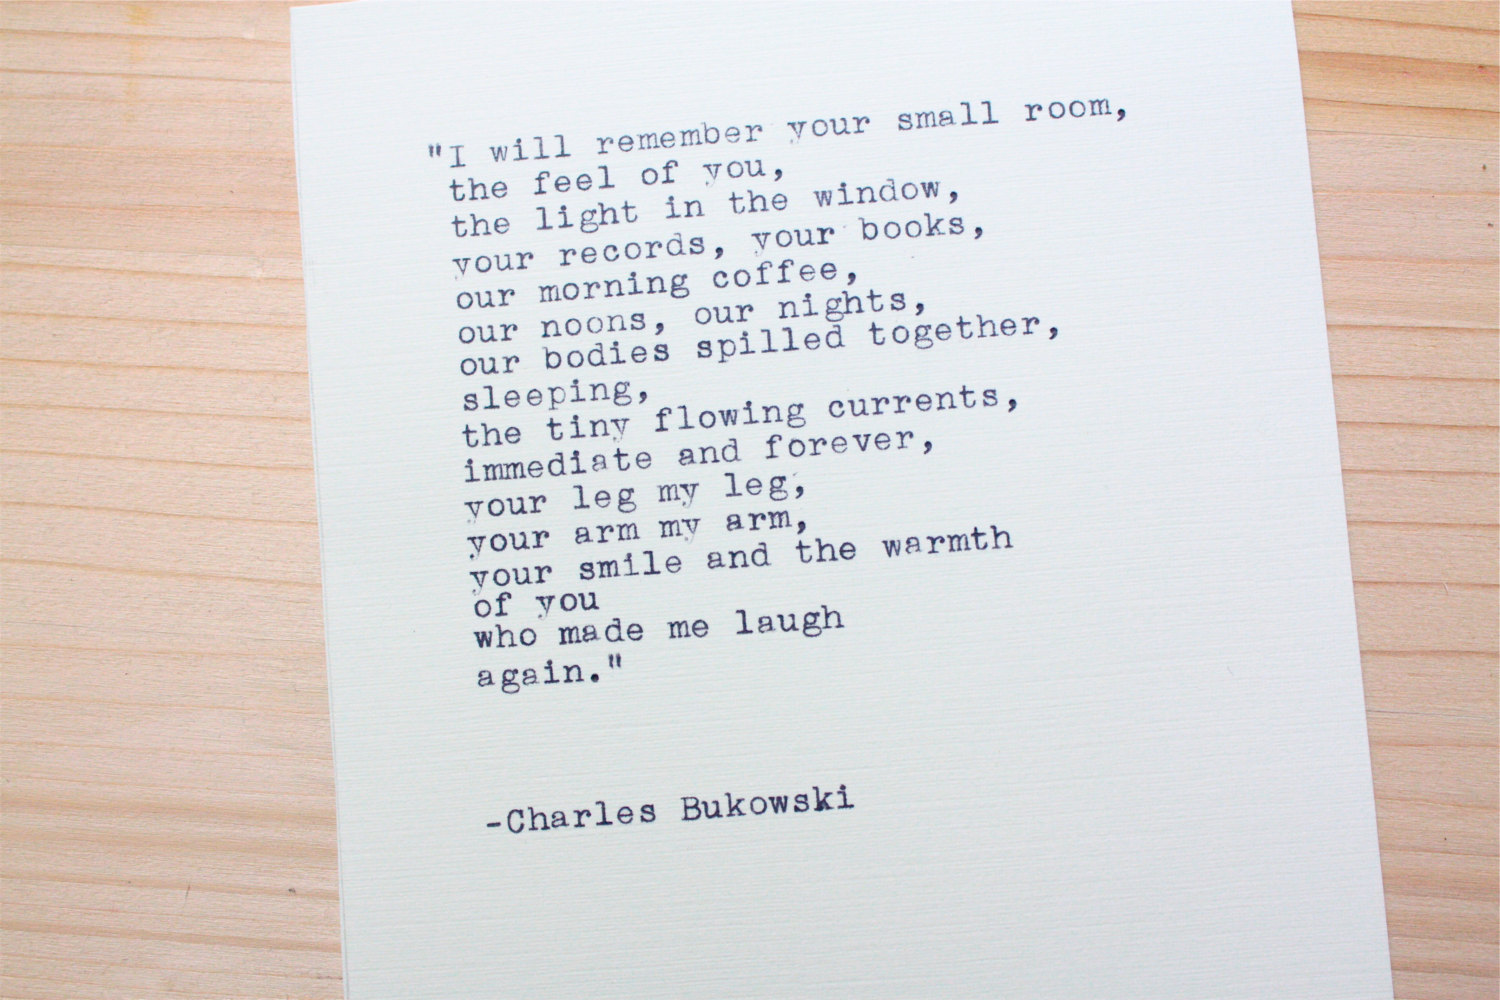 Charles Bukowski Quotes About Love. QuotesGram